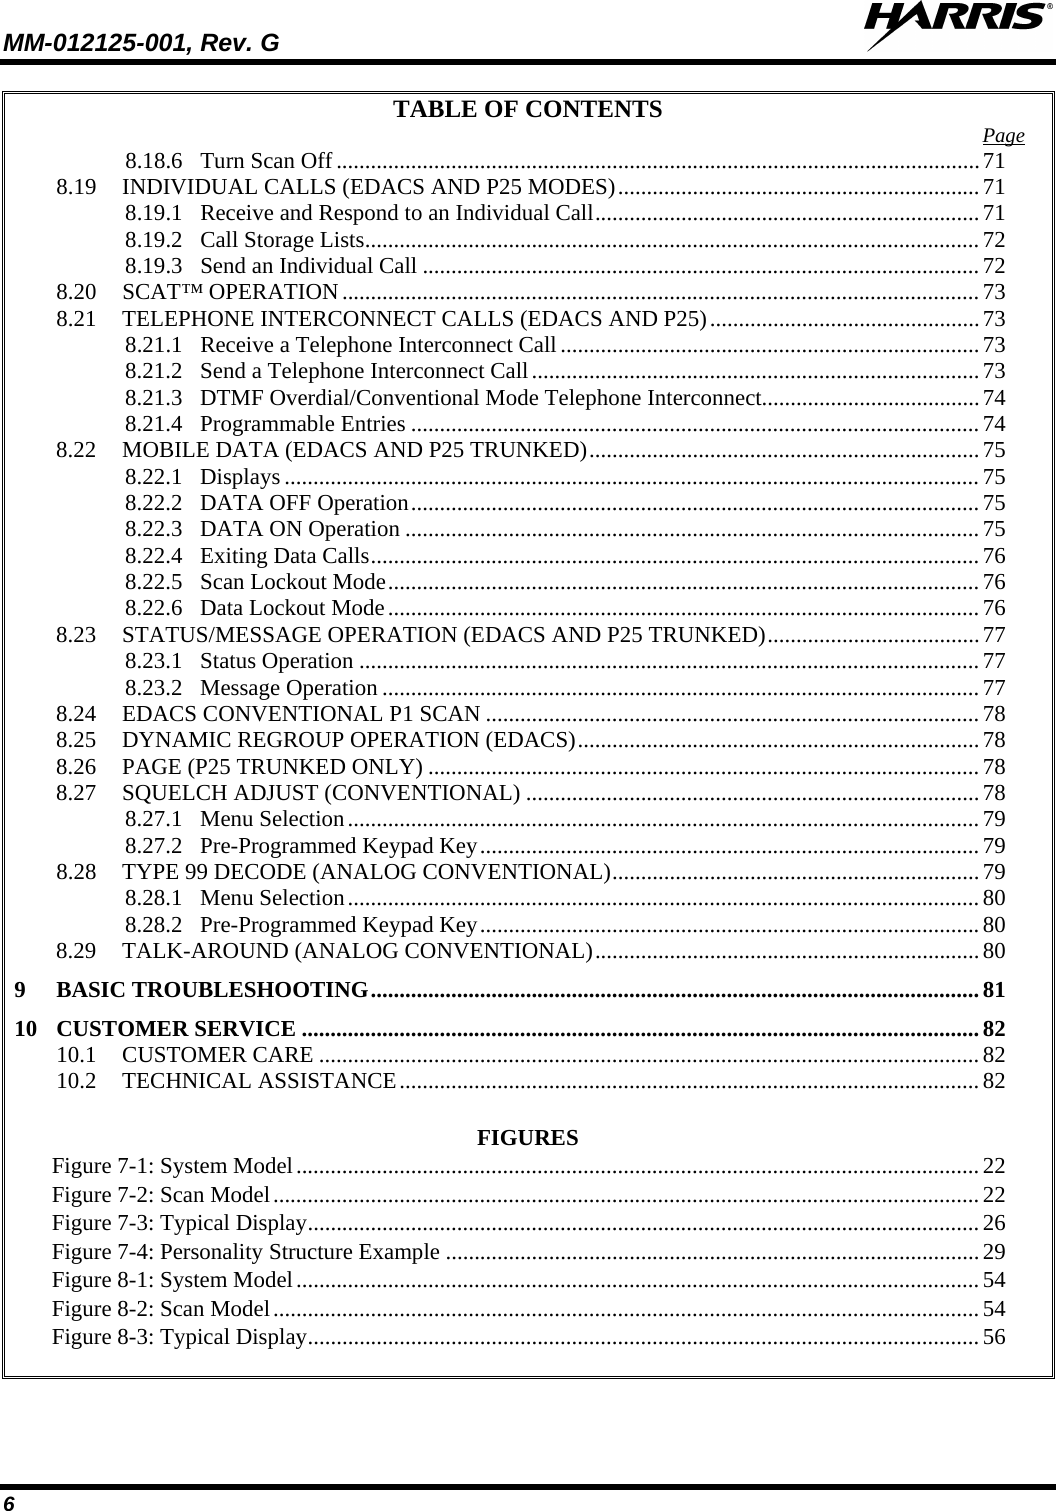 MM-012125-001, Rev. G   6 TABLE OF CONTENTS 8.18.6 Turn Scan Off ................................................................................................................ 71Page  8.19 INDIVIDUAL CALLS (EDACS AND P25 MODES) ............................................................... 71 8.19.1 Receive and Respond to an Individual Call ................................................................... 71 8.19.2 Call Storage Lists ........................................................................................................... 72 8.19.3 Send an Individual Call ................................................................................................. 72 8.20 SCAT™ OPERATION ............................................................................................................... 73 8.21 TELEPHONE INTERCONNECT CALLS (EDACS AND P25) ............................................... 73 8.21.1 Receive a Telephone Interconnect Call ......................................................................... 73 8.21.2 Send a Telephone Interconnect Call .............................................................................. 73 8.21.3 DTMF Overdial/Conventional Mode Telephone Interconnect ...................................... 74 8.21.4 Programmable Entries ................................................................................................... 74 8.22 MOBILE DATA (EDACS AND P25 TRUNKED) .................................................................... 75 8.22.1 Displays ......................................................................................................................... 75 8.22.2 DATA OFF Operation ................................................................................................... 75 8.22.3 DATA ON Operation .................................................................................................... 75 8.22.4 Exiting Data Calls .......................................................................................................... 76 8.22.5 Scan Lockout Mode ....................................................................................................... 76 8.22.6 Data Lockout Mode ....................................................................................................... 76 8.23 STATUS/MESSAGE OPERATION (EDACS AND P25 TRUNKED) ..................................... 77 8.23.1 Status Operation ............................................................................................................ 77 8.23.2 Message Operation ........................................................................................................ 77 8.24 EDACS CONVENTIONAL P1 SCAN ...................................................................................... 78 8.25 DYNAMIC REGROUP OPERATION (EDACS) ...................................................................... 78 8.26 PAGE (P25 TRUNKED ONLY) ................................................................................................ 78 8.27 SQUELCH ADJUST (CONVENTIONAL) ............................................................................... 78 8.27.1 Menu Selection .............................................................................................................. 79 8.27.2 Pre-Programmed Keypad Key ....................................................................................... 79 8.28 TYPE 99 DECODE (ANALOG CONVENTIONAL) ................................................................ 79 8.28.1 Menu Selection .............................................................................................................. 80 8.28.2 Pre-Programmed Keypad Key ....................................................................................... 80 8.29 TALK-AROUND (ANALOG CONVENTIONAL) ................................................................... 80 9 BASIC TROUBLESHOOTING .......................................................................................................... 81 10 CUSTOMER SERVICE ...................................................................................................................... 82 10.1 CUSTOMER CARE ................................................................................................................... 82 10.2 TECHNICAL ASSISTANCE ..................................................................................................... 82  FIGURES Figure 7-1: System Model   ....................................................................................................................... 22Figure 7-2: Scan Model   ........................................................................................................................... 22Figure 7-3: Typical Display   ..................................................................................................................... 26Figure 7-4: Personality Structure Example   ............................................................................................. 29Figure 8-1: System Model   ....................................................................................................................... 54Figure 8-2: Scan Model   ........................................................................................................................... 54Figure 8-3: Typical Display   ..................................................................................................................... 56 